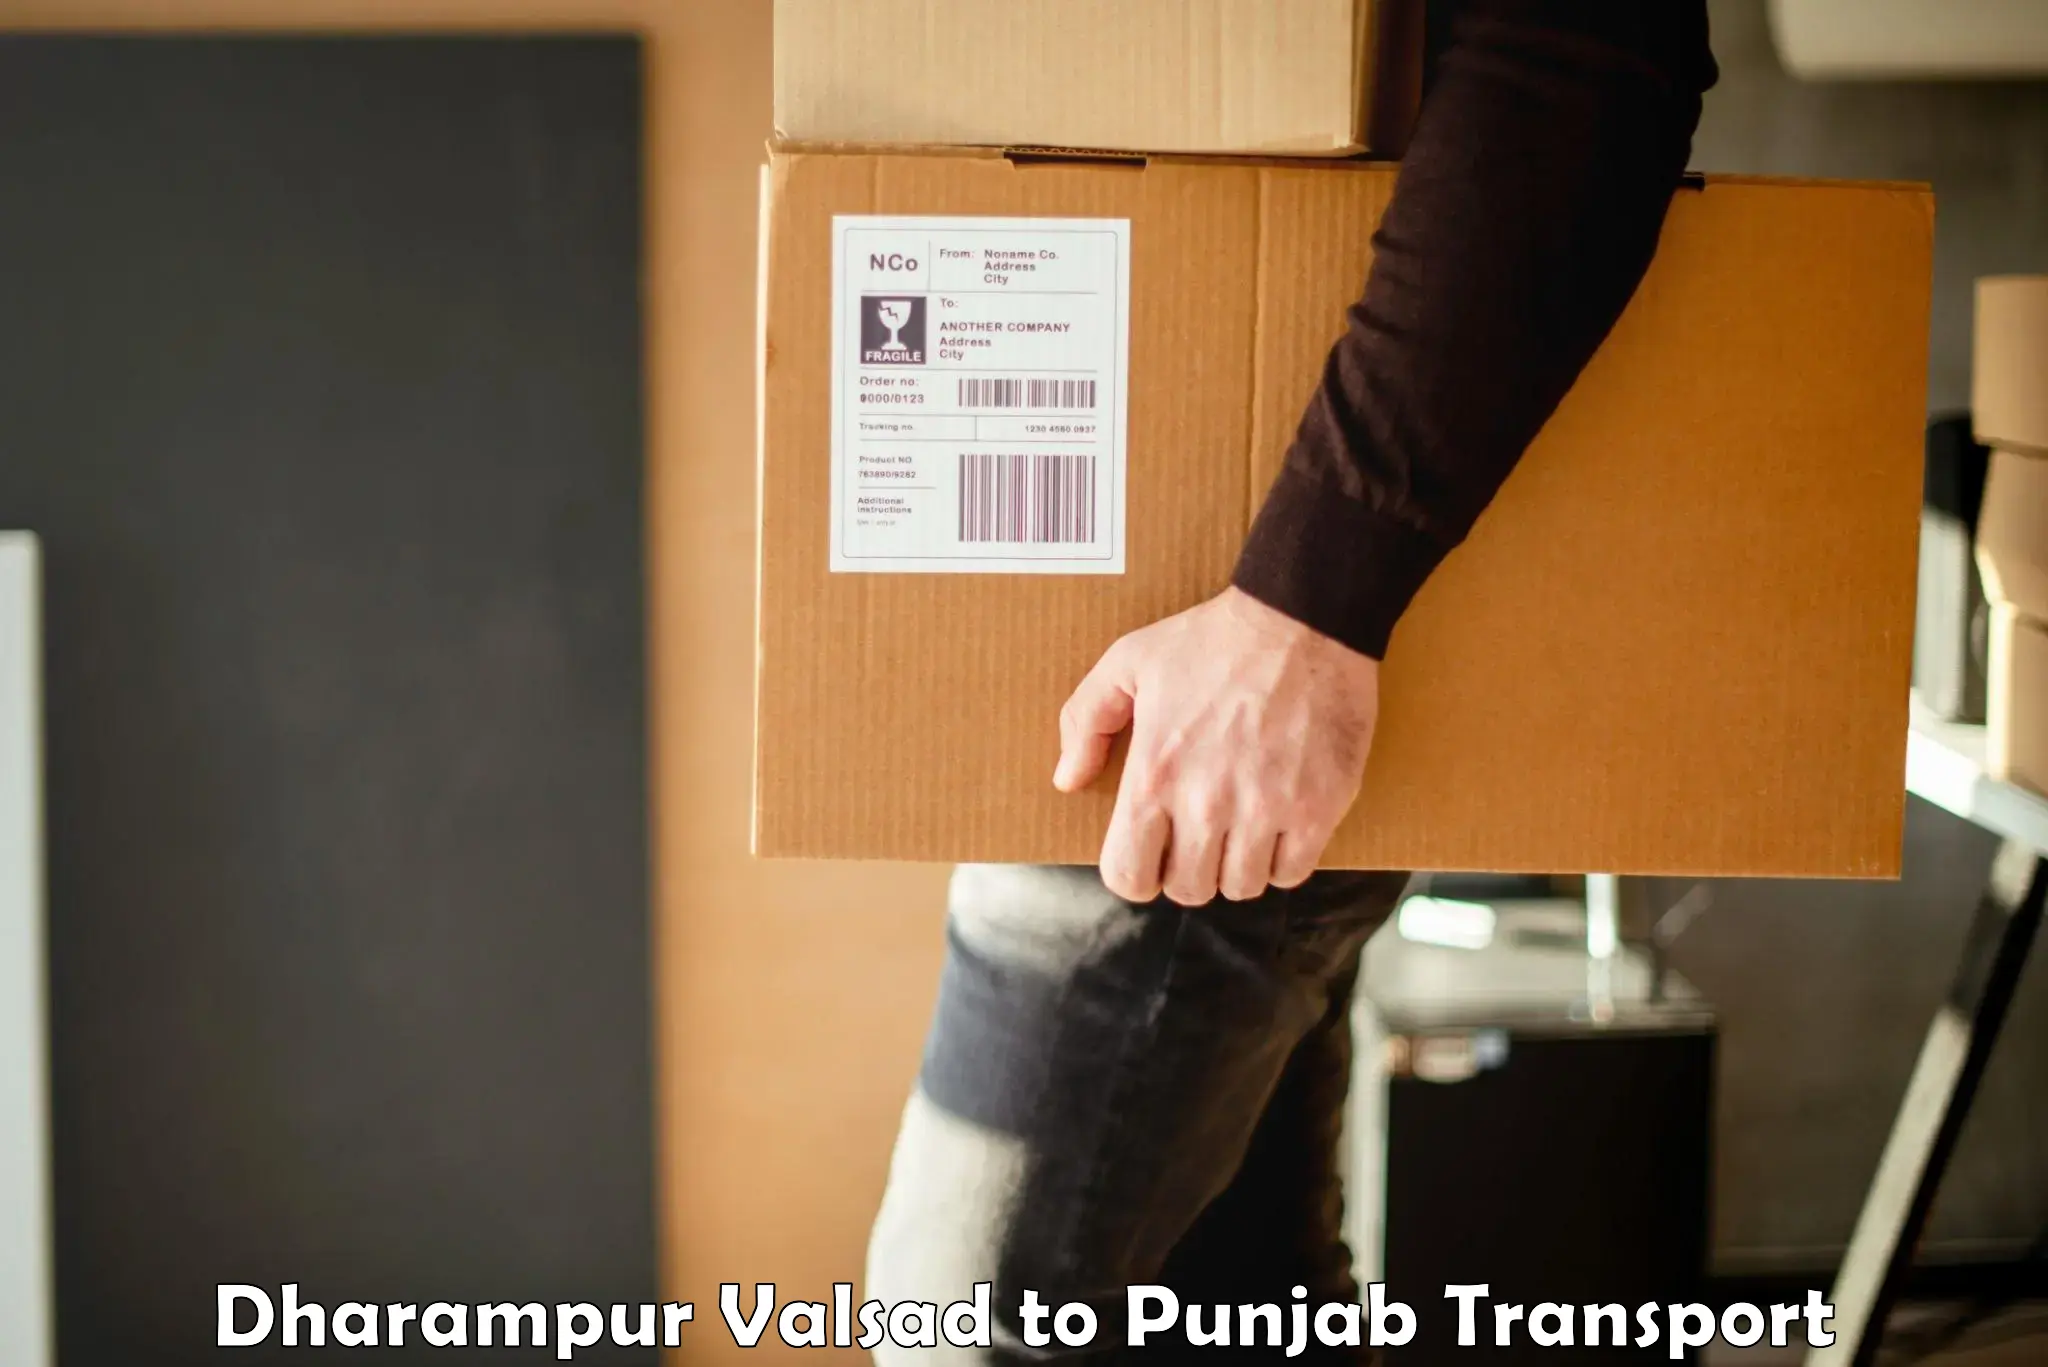 Two wheeler parcel service Dharampur Valsad to Pathankot